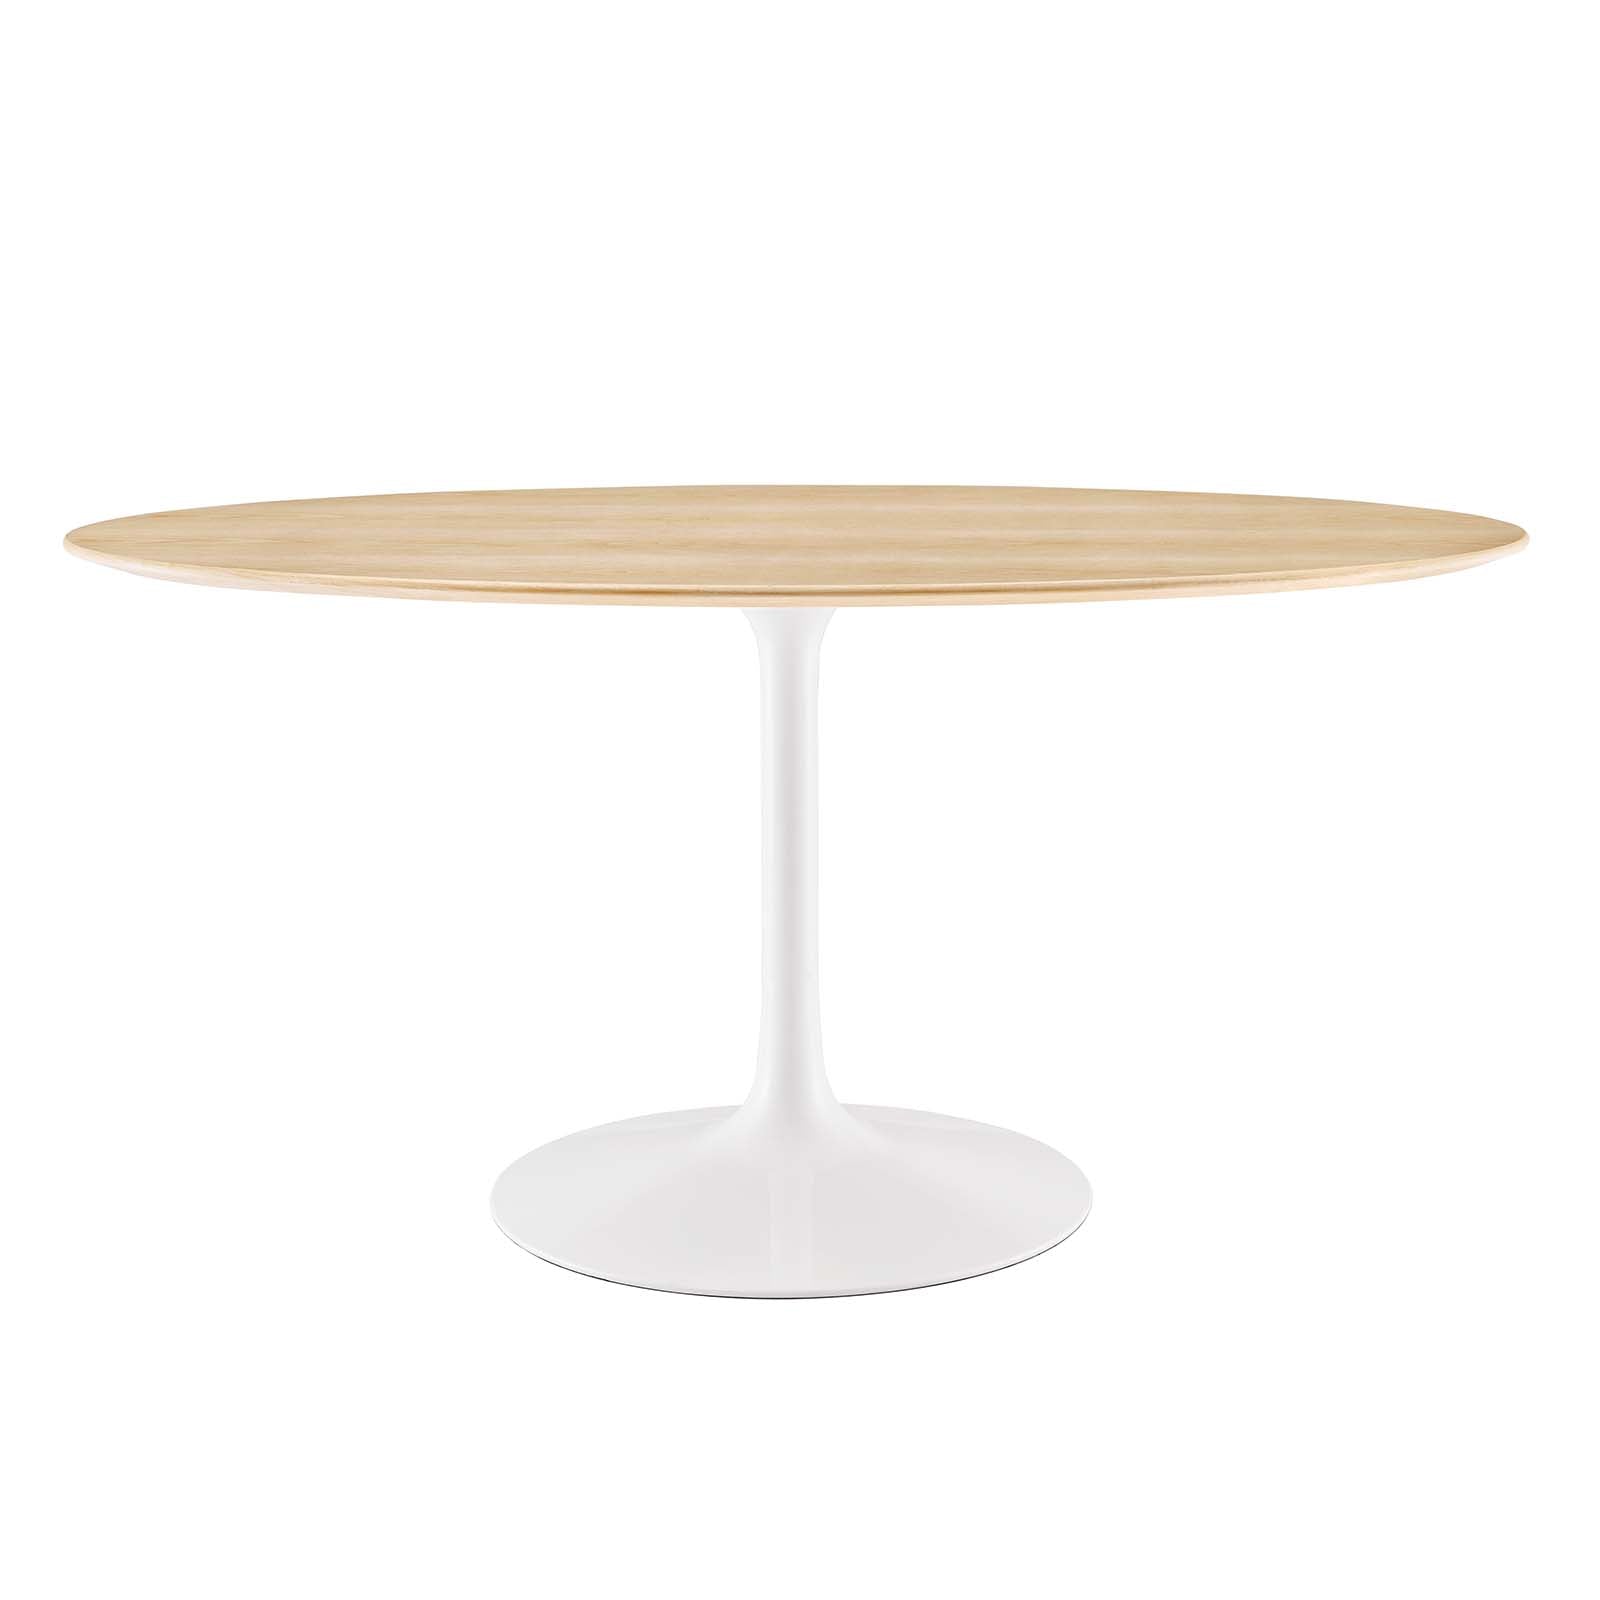 Lippa 60" Oval Dining Table